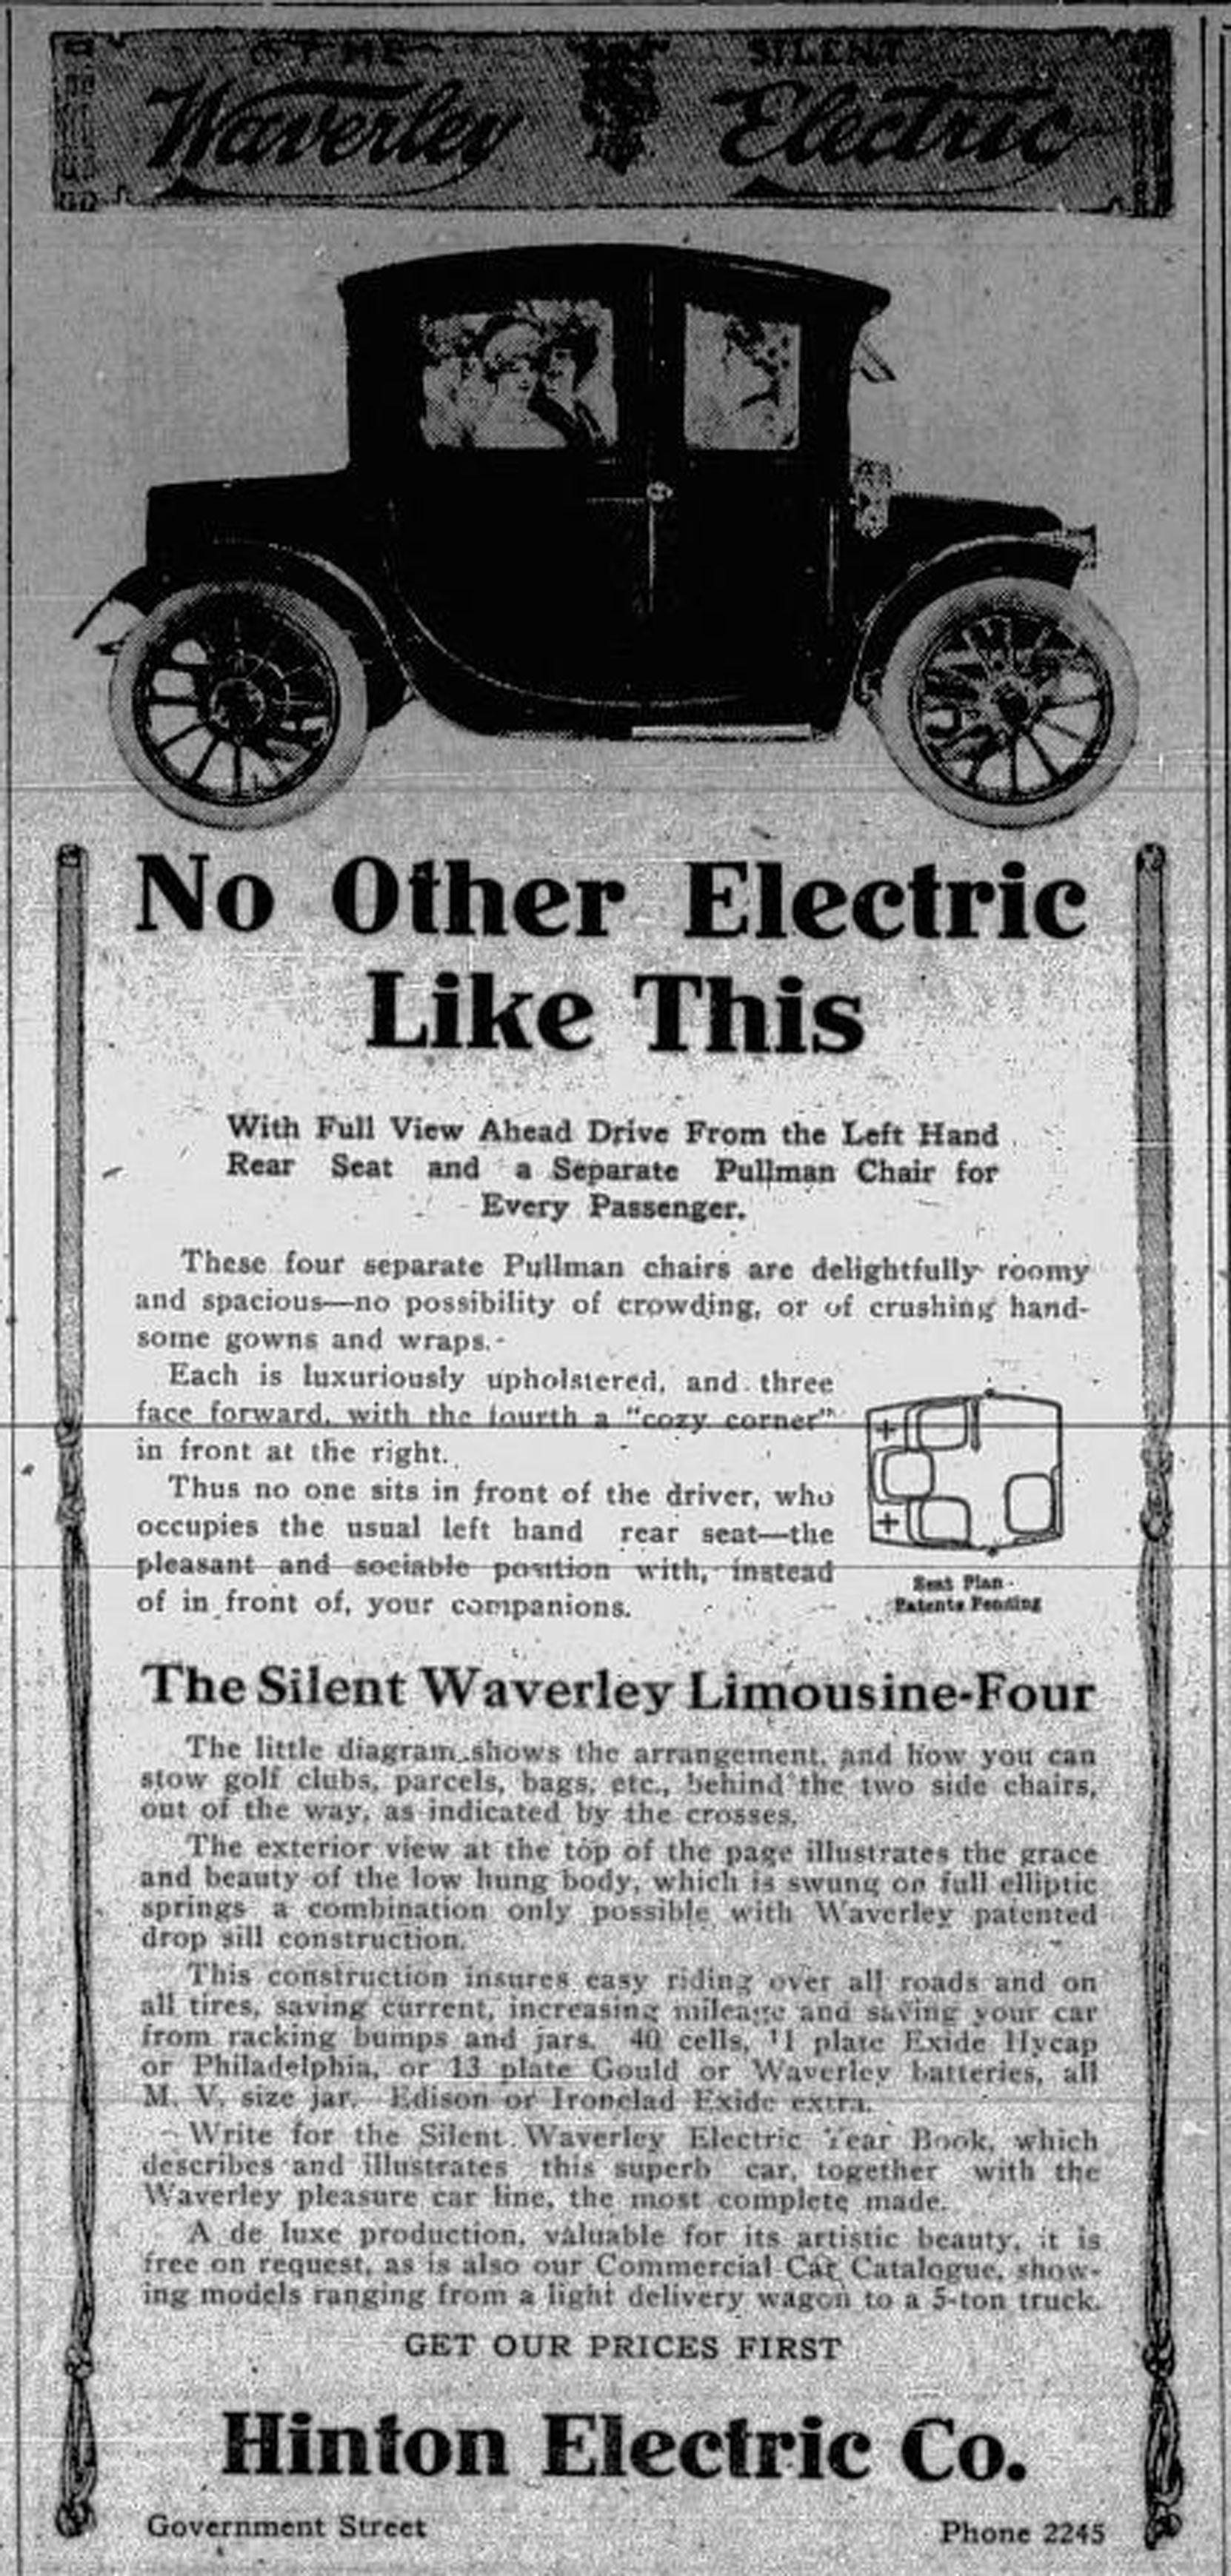 1913 advertisement by Hinton Electric Co., 911 Government Street, for Waverley electric cars (Victoria Online Sightseeing Tours collection)